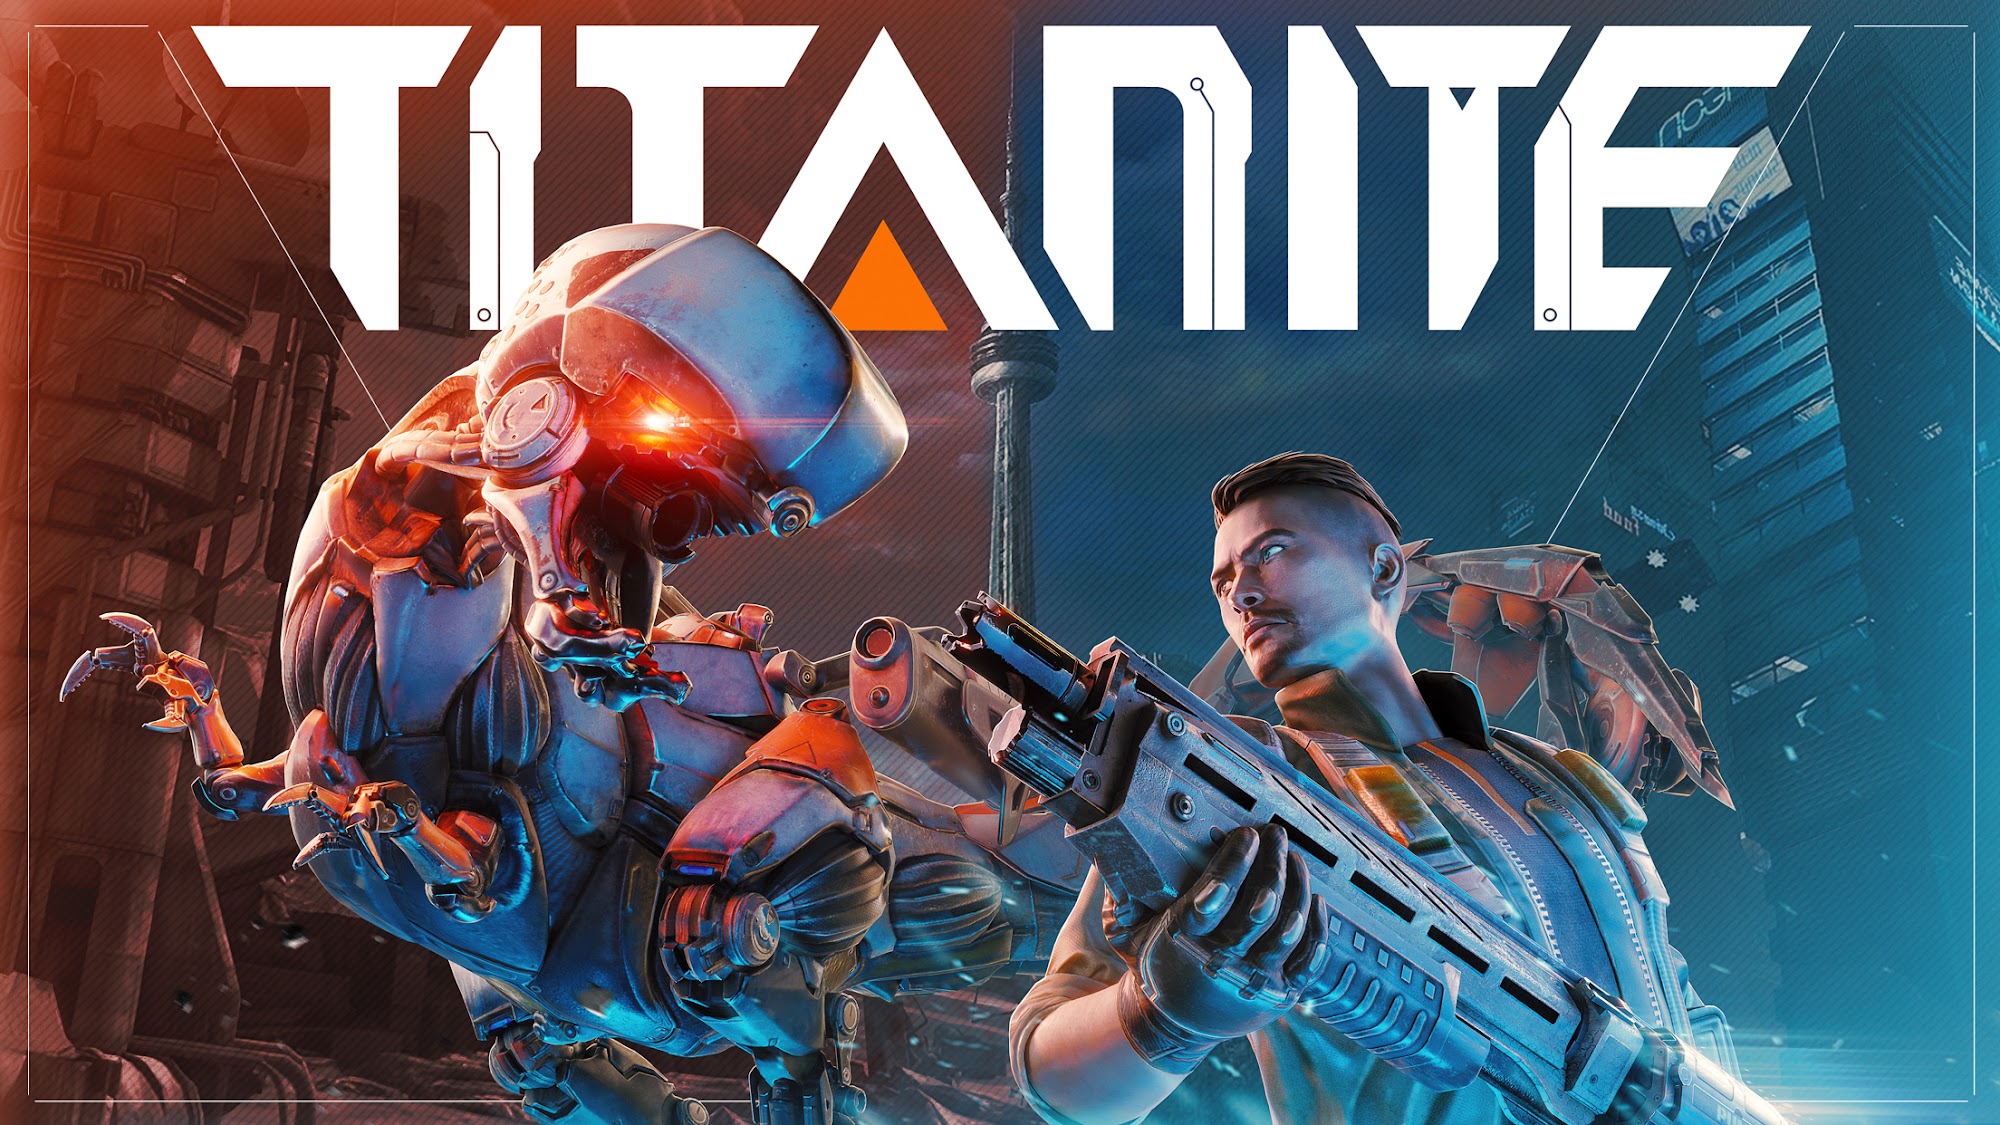 Download Titanite Android free game.